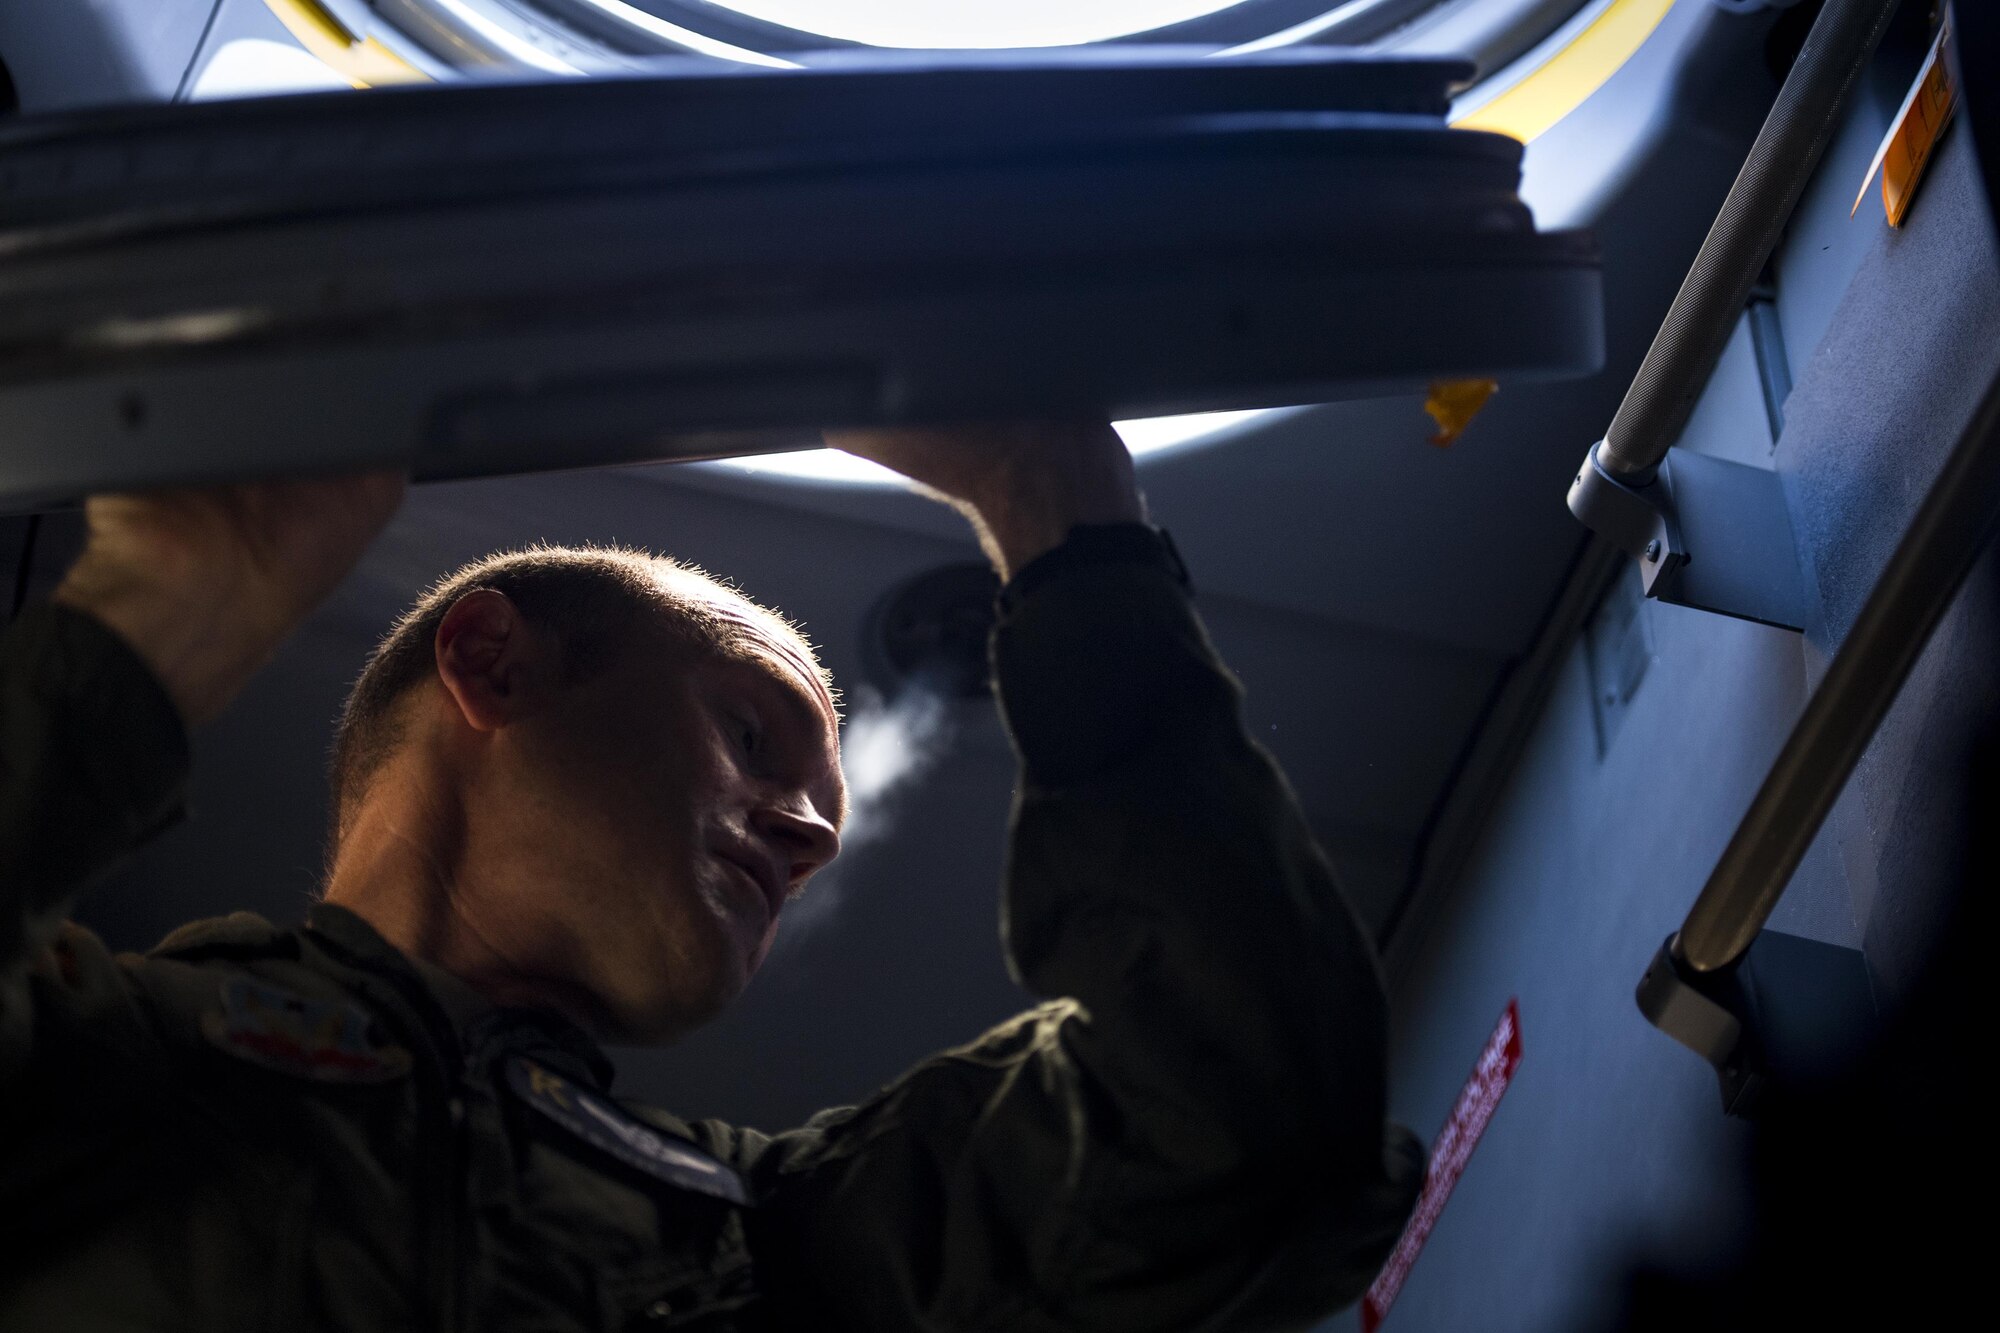 U.S. Air Force Master Sgt. Brian McAfee, 71st Rescue Squadron loadmaster, removes an access hatch during pre-flight checks in an HC-130J Combat King II, July 29, 2016, at Moody Air Force Base, Ga. This flight marked the first time an HC-130J landed at the unimproved landing zone on Bemiss Field, part of Grand Bay Bombing and Gunnery Range, which was previously used for airdrops and helicopter landings. The landing validated the pilot’s training for future operations in austere locations and met requirements for training that cannot be accomplished on paved runways or assault strips. (U.S. Air Force photo by Staff Sgt. Ryan Callaghan)
